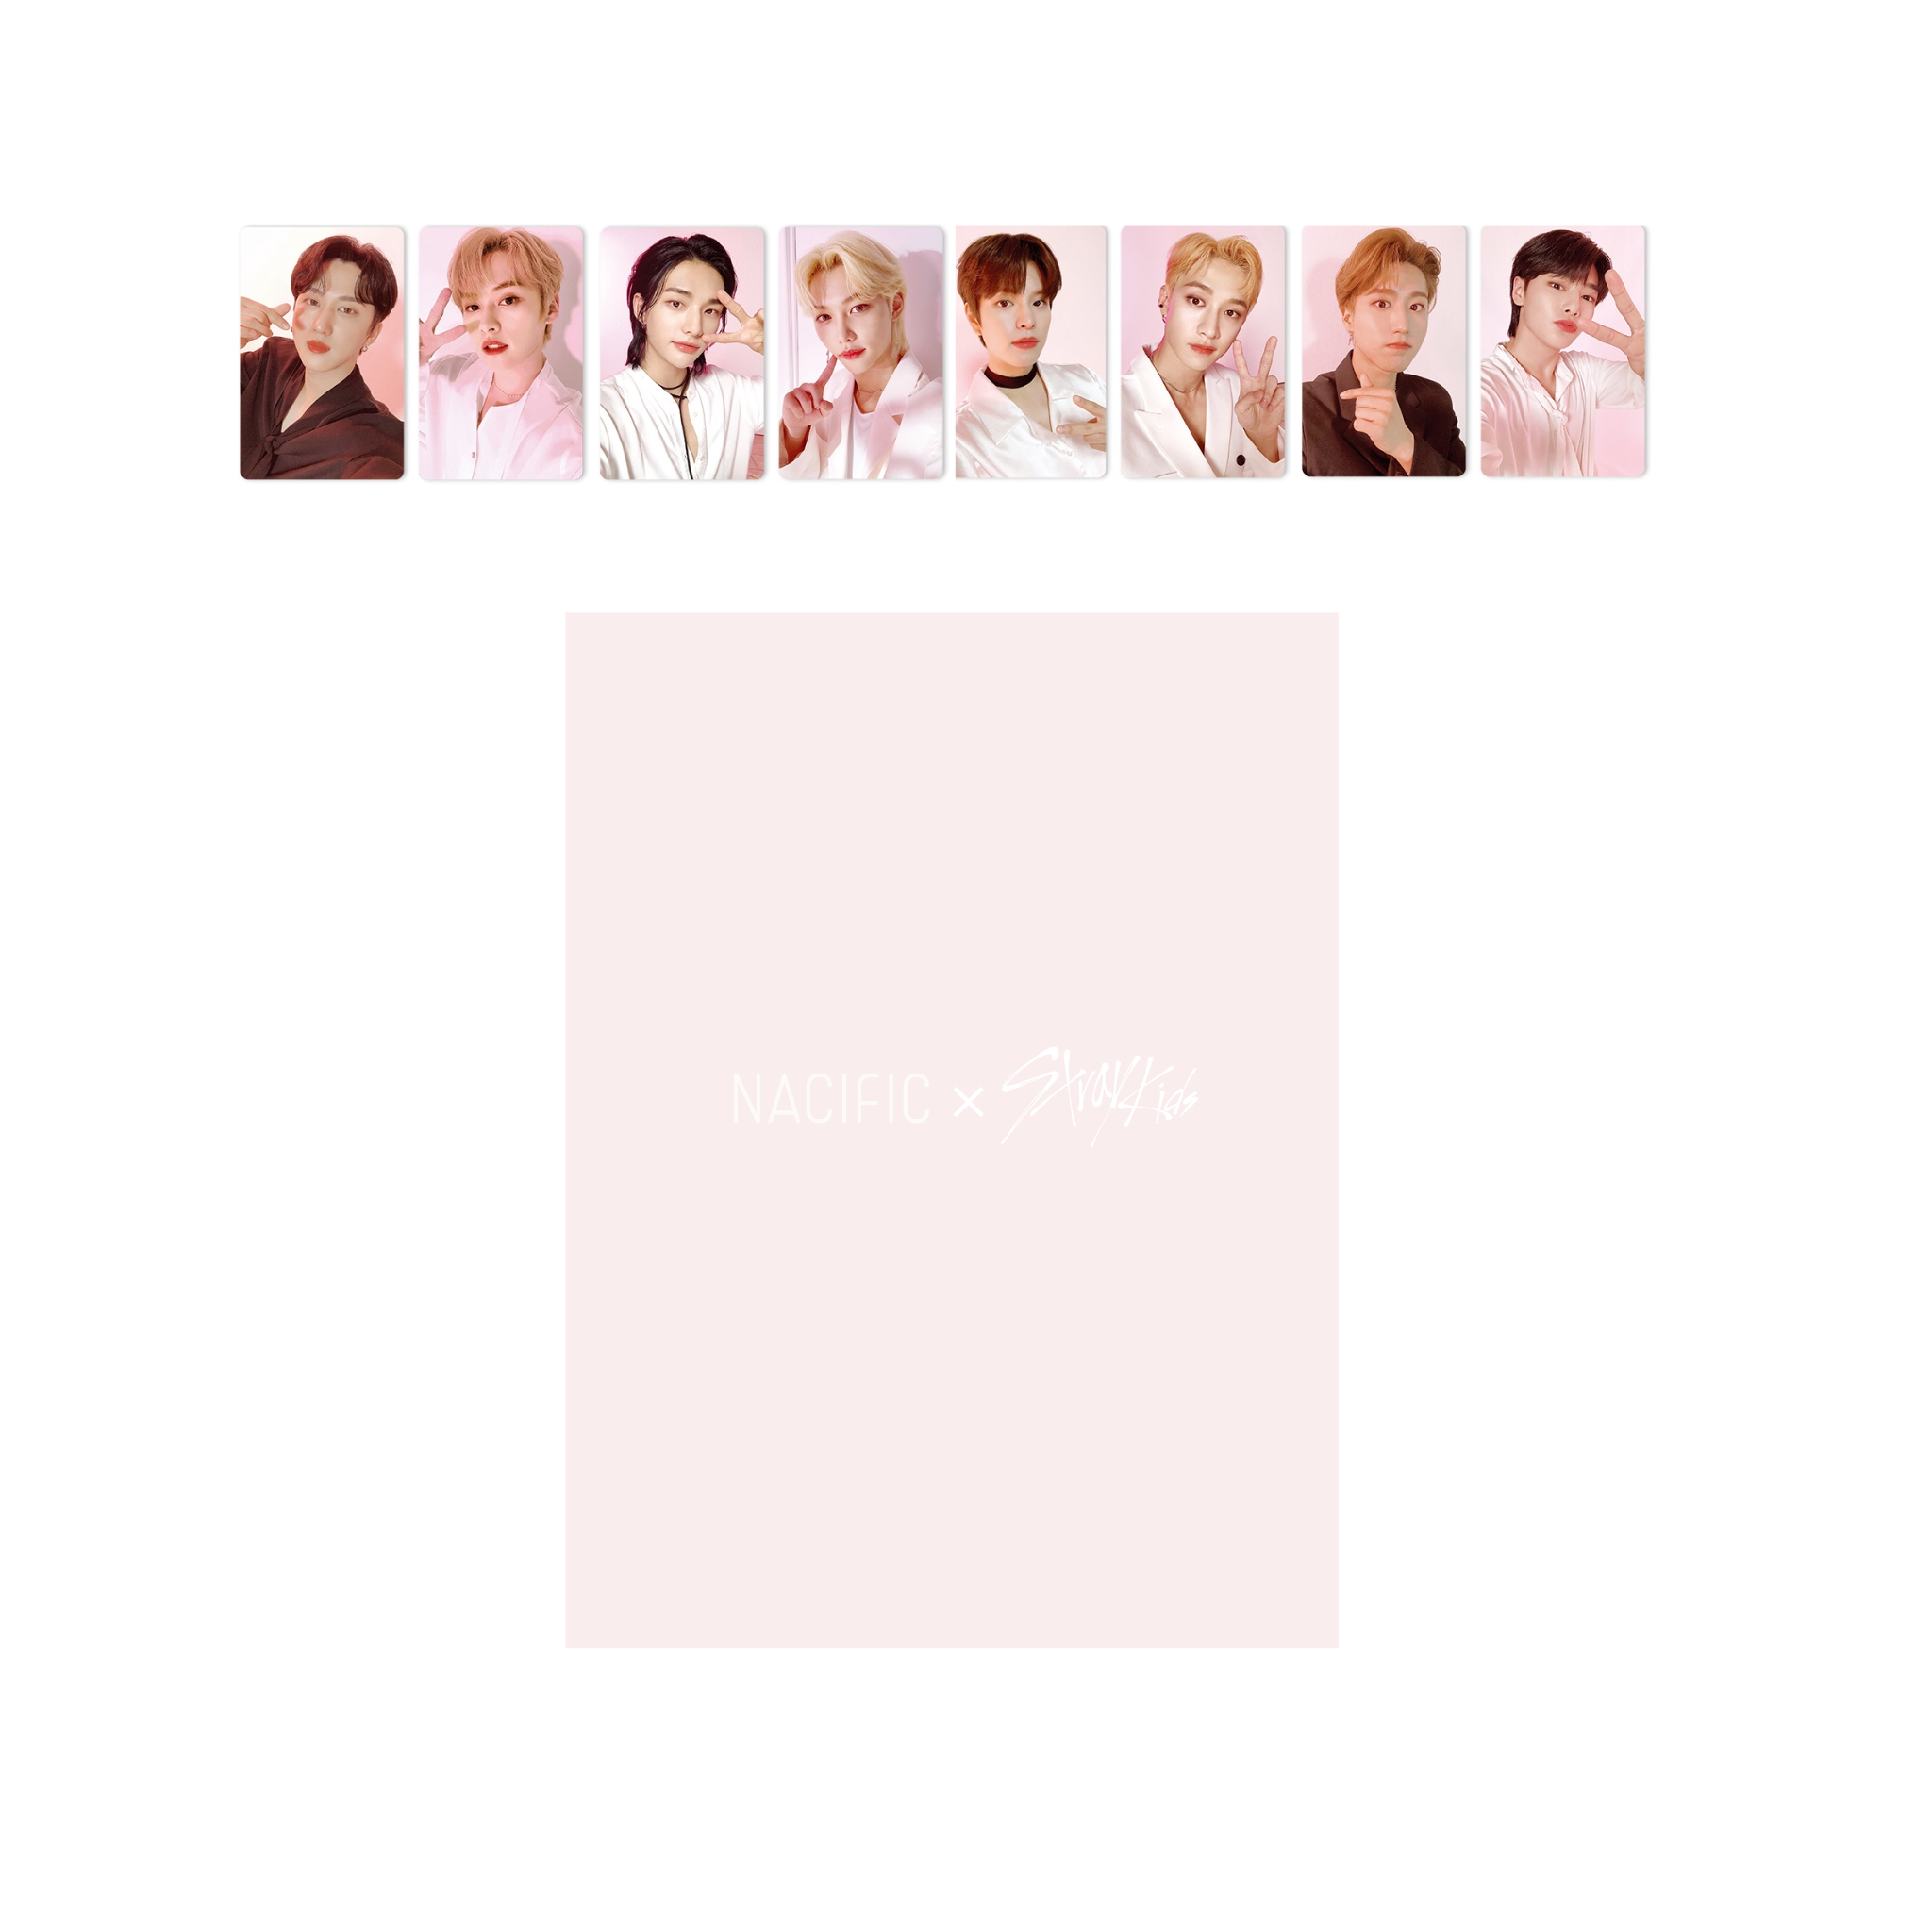 NACIFIC X STRAY KIDS Pink Event OT8 Photocards